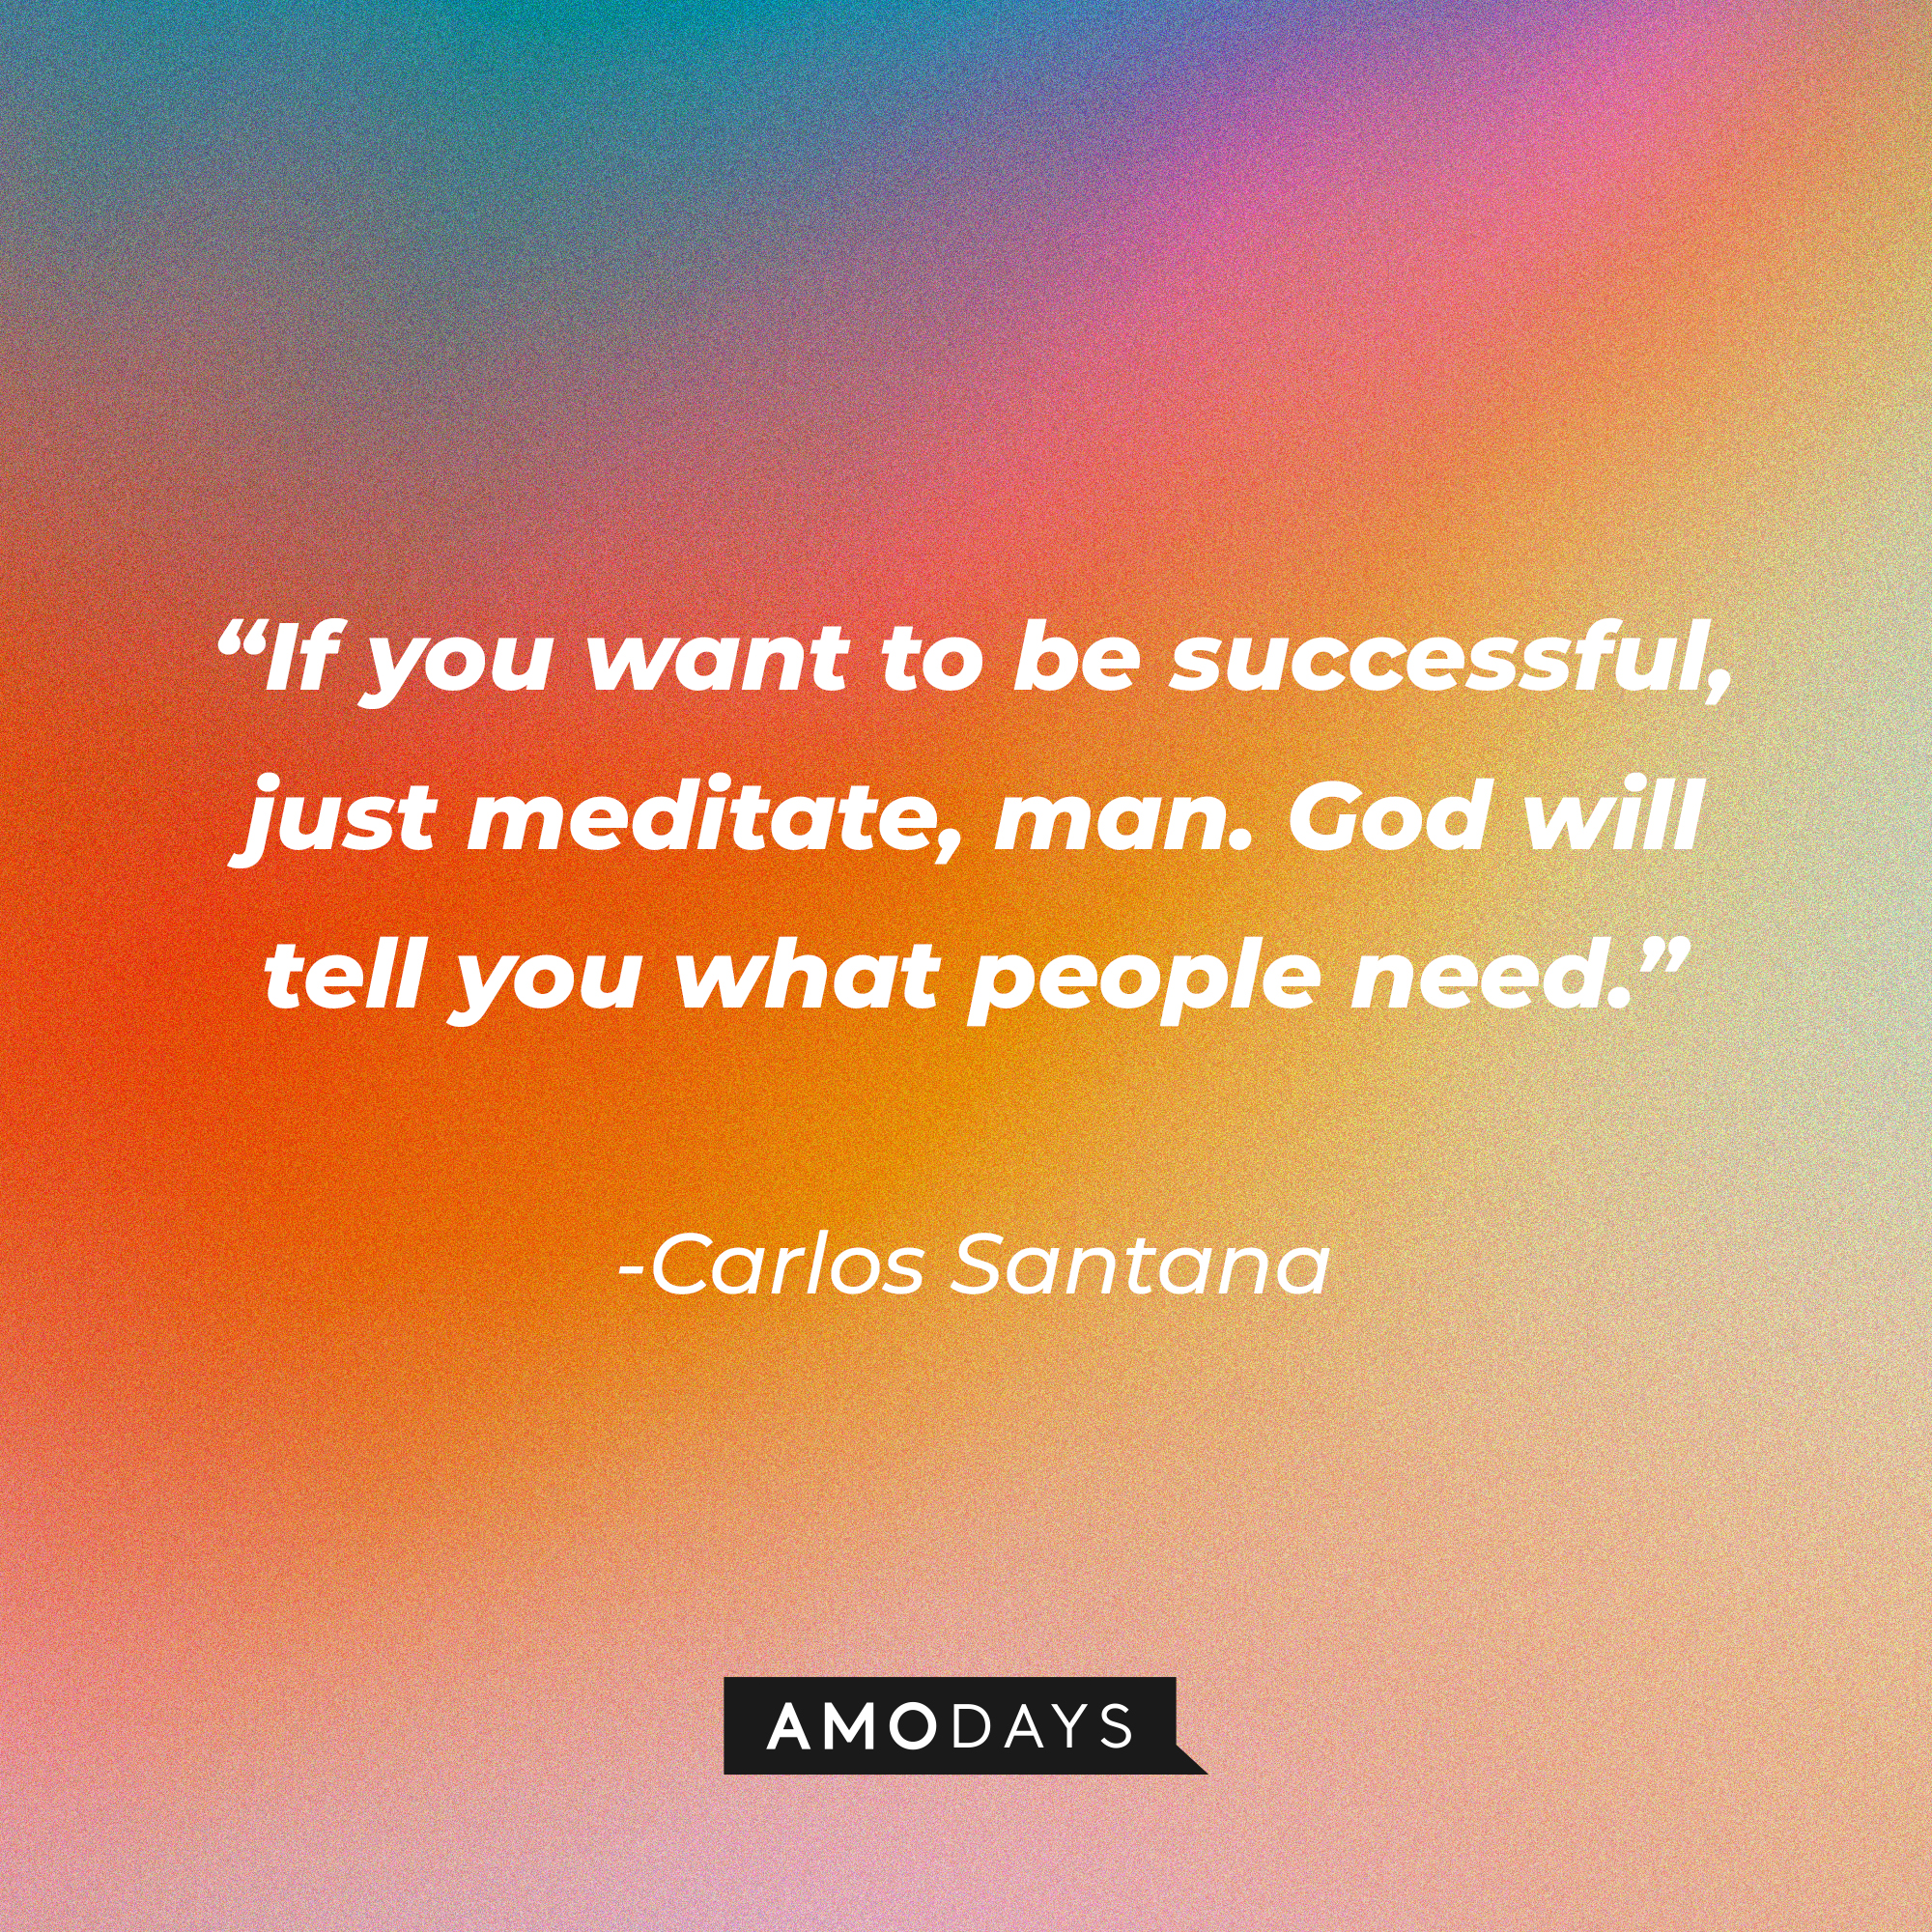 Carlos Santana’s quote: "If you want to be successful, just meditate, man. God will tell you what people need."┃Source: AmoDays